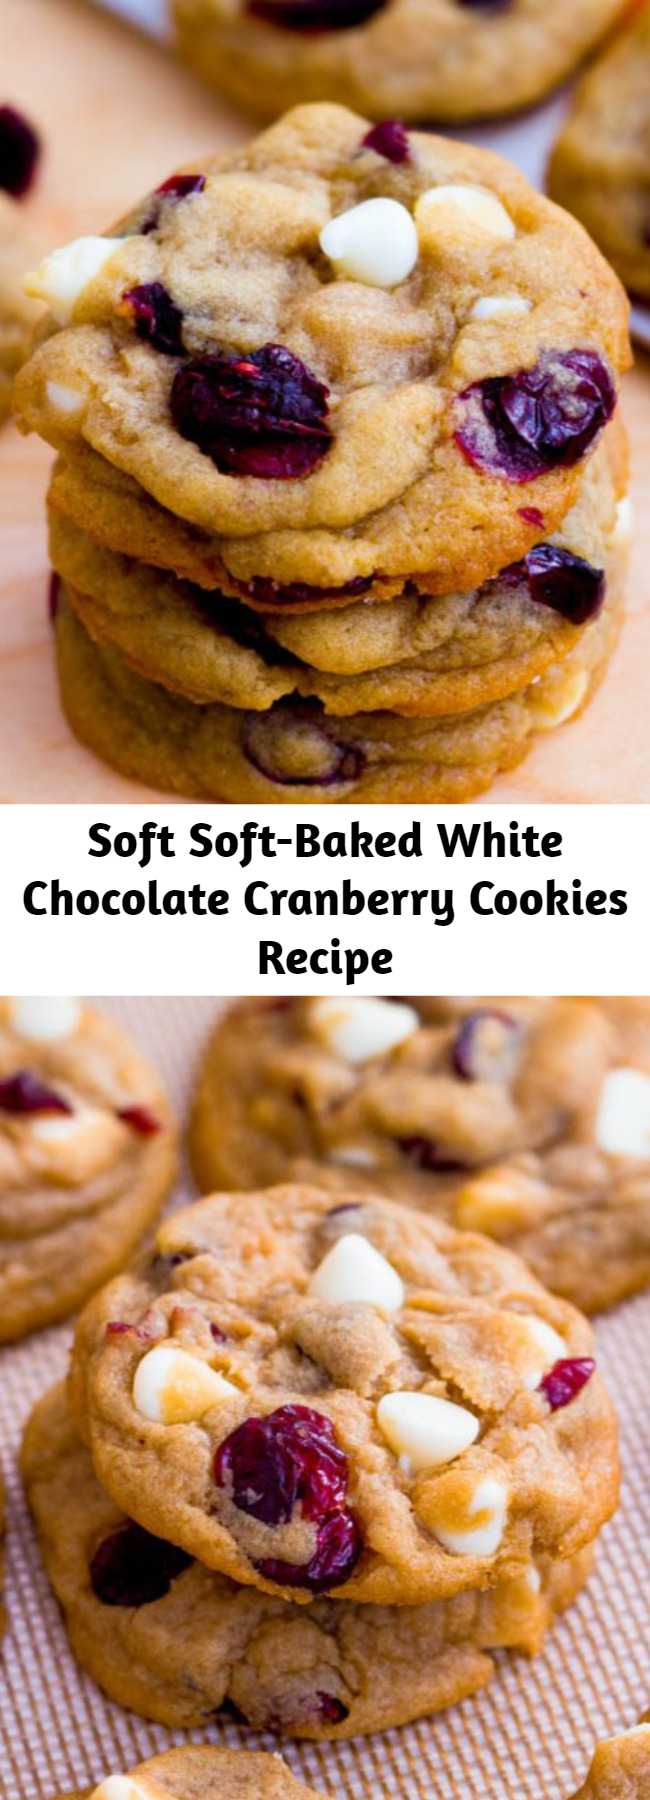 Soft Soft-Baked White Chocolate Cranberry Cookies Recipe - Perfectly soft and thick white chocolate cranberry cookies. The cornstarch is the secret! One of my favorite flavor combinations ever!